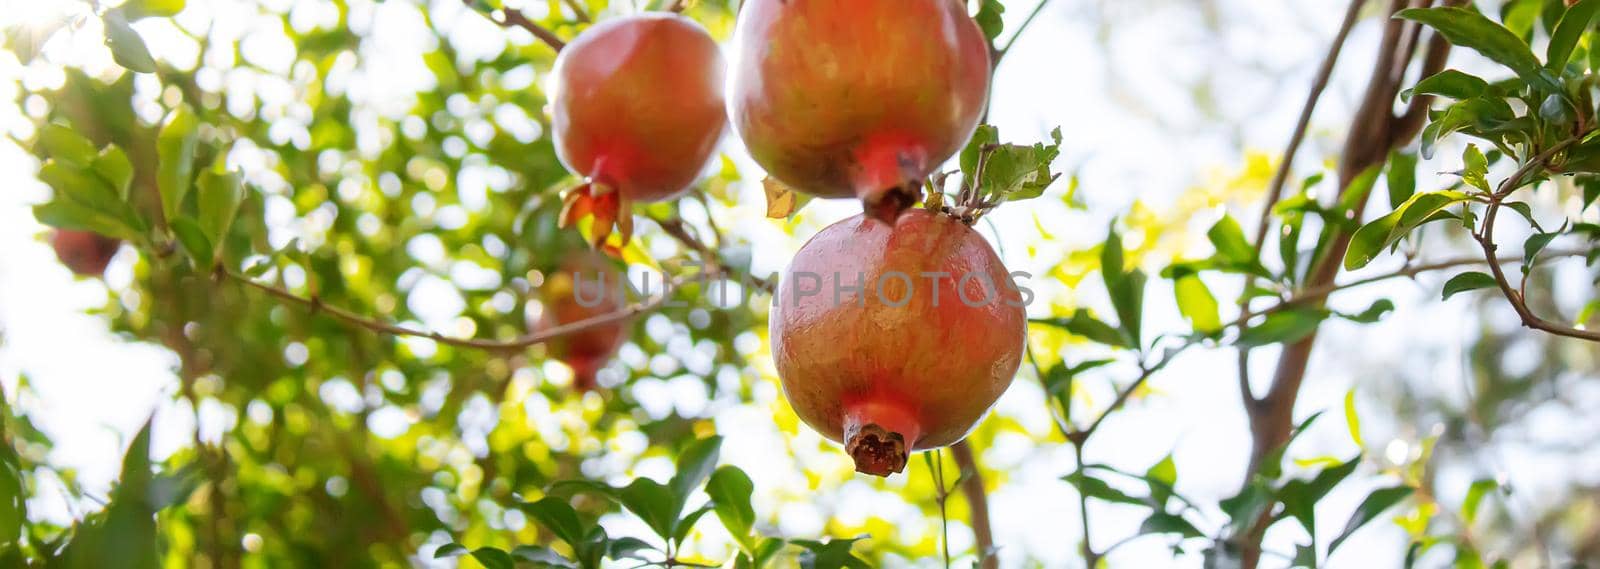 pomegranate on tree in a farm garden.selectiv focus.nature